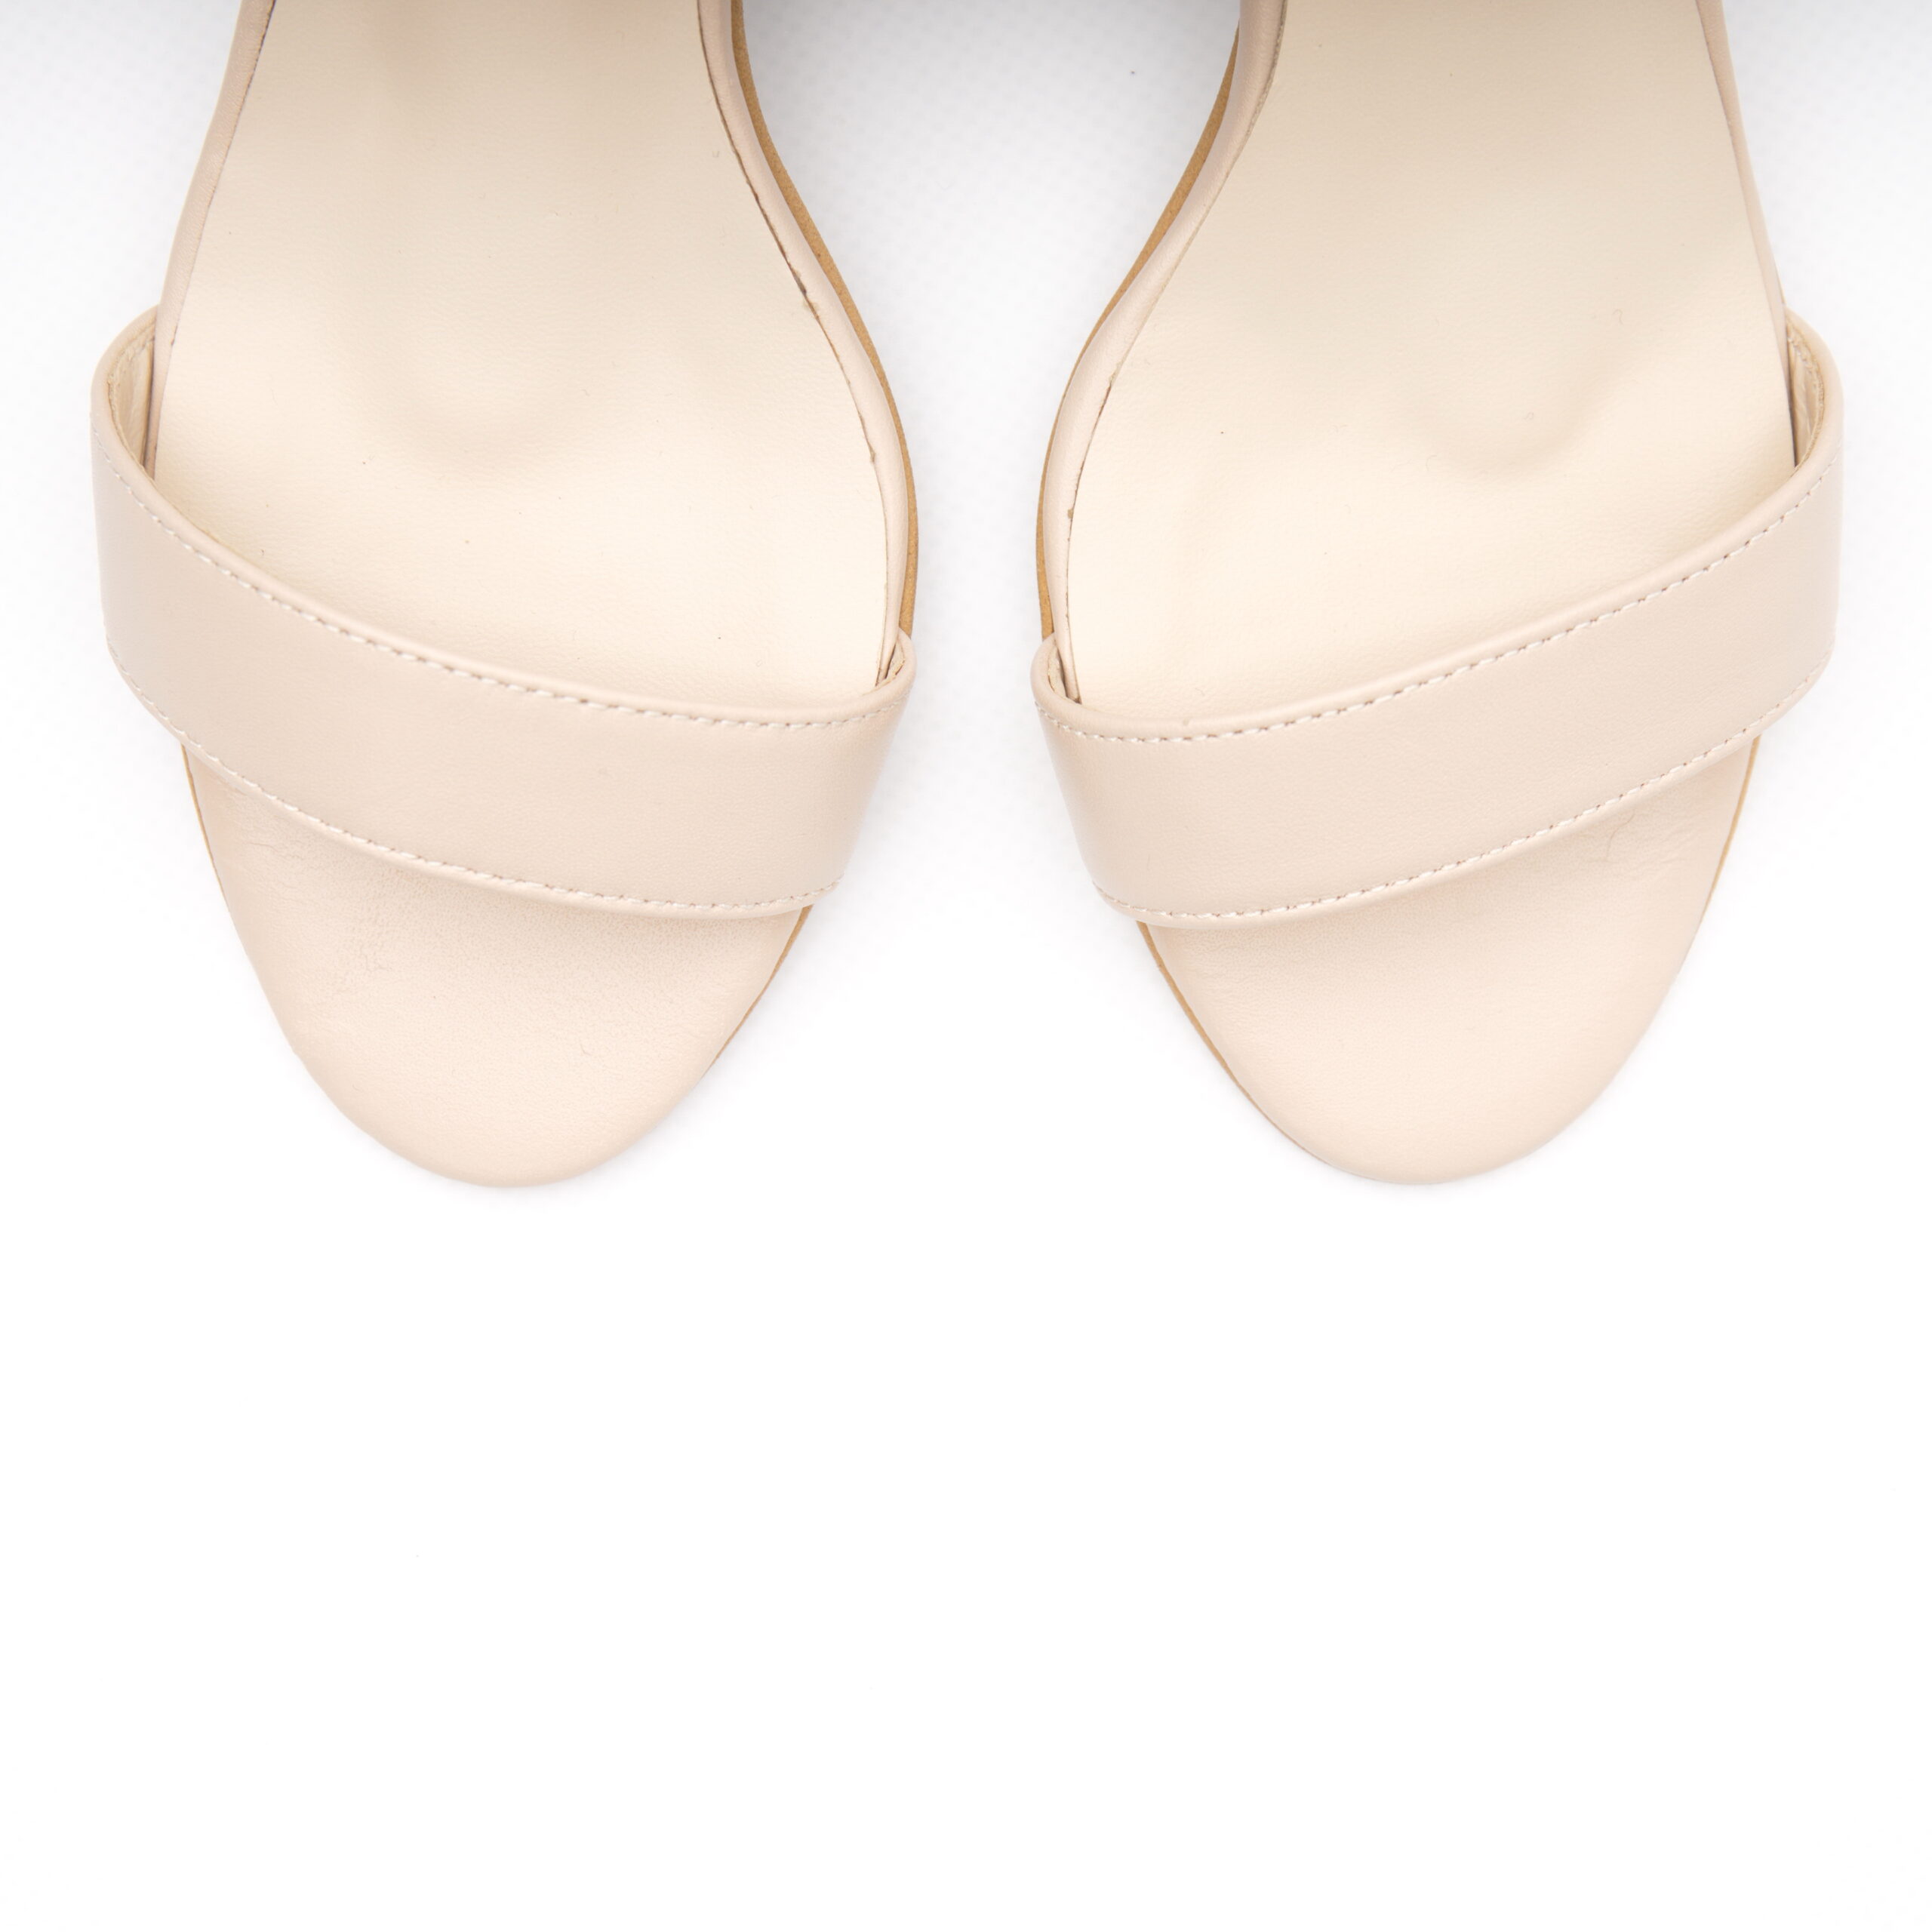 Petite size beige sandals | MD Petite Shoes | Small Feet UK